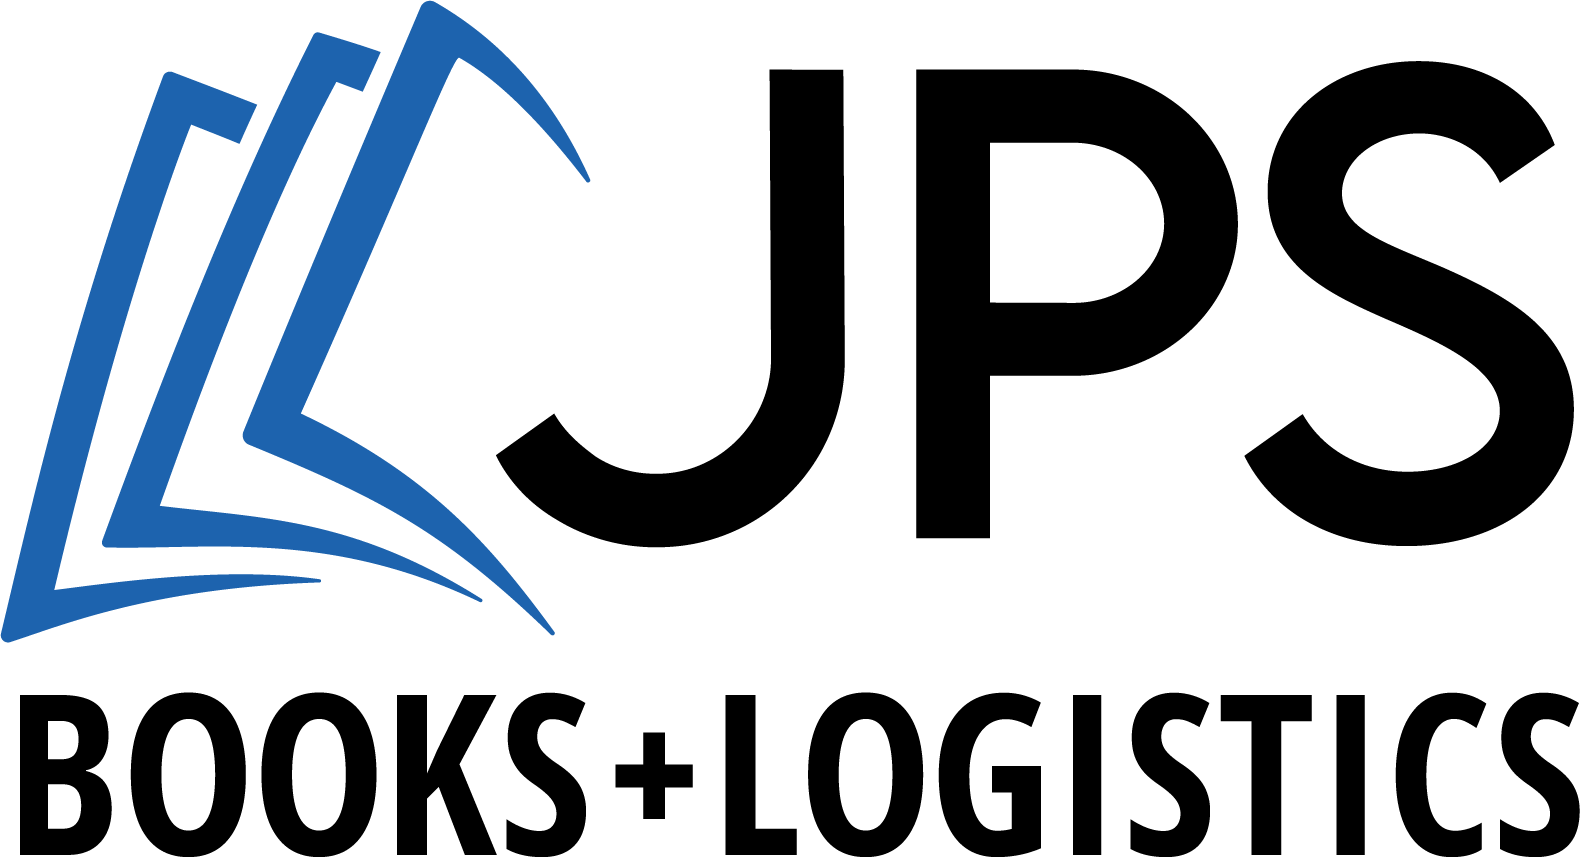 45 years of JPS Books and Logistics, Quality Books and kits on-time and fast! Book Printing services partner for book printing and binding LOGO